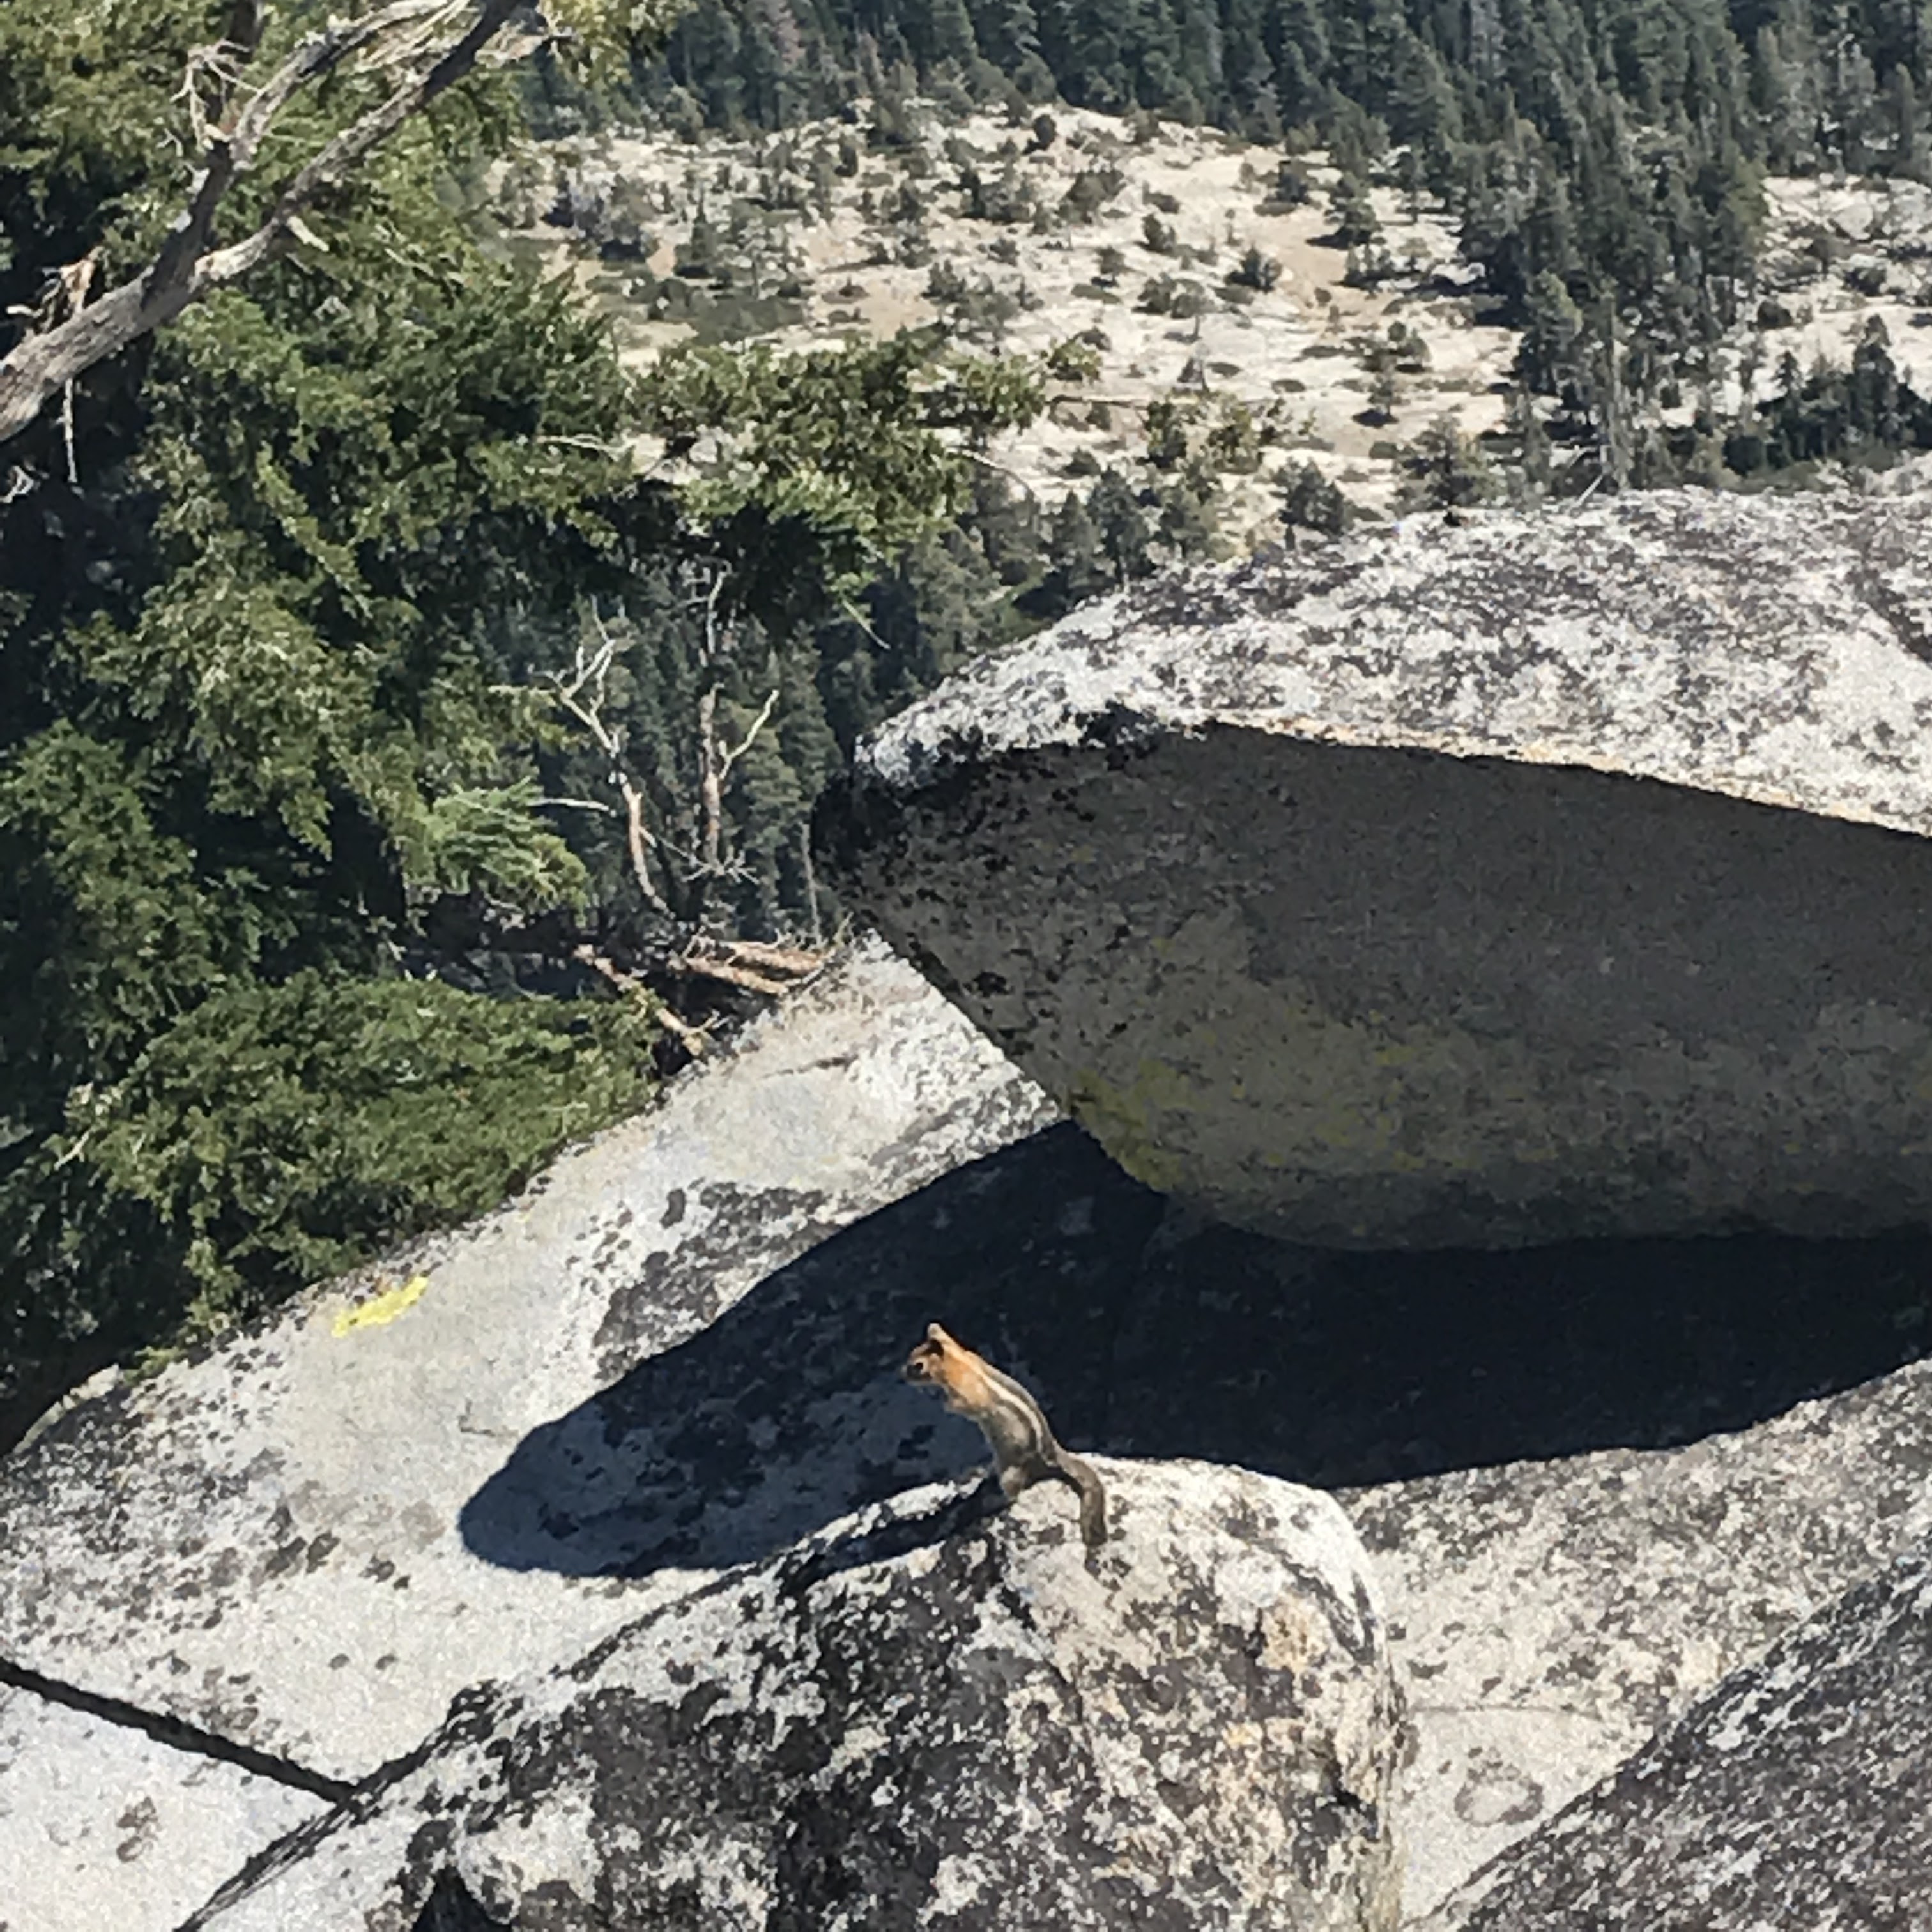 A little ground squirrel joining me on the rocks on Maggie's Peaks. 8/24/2017 Lake Tahoe